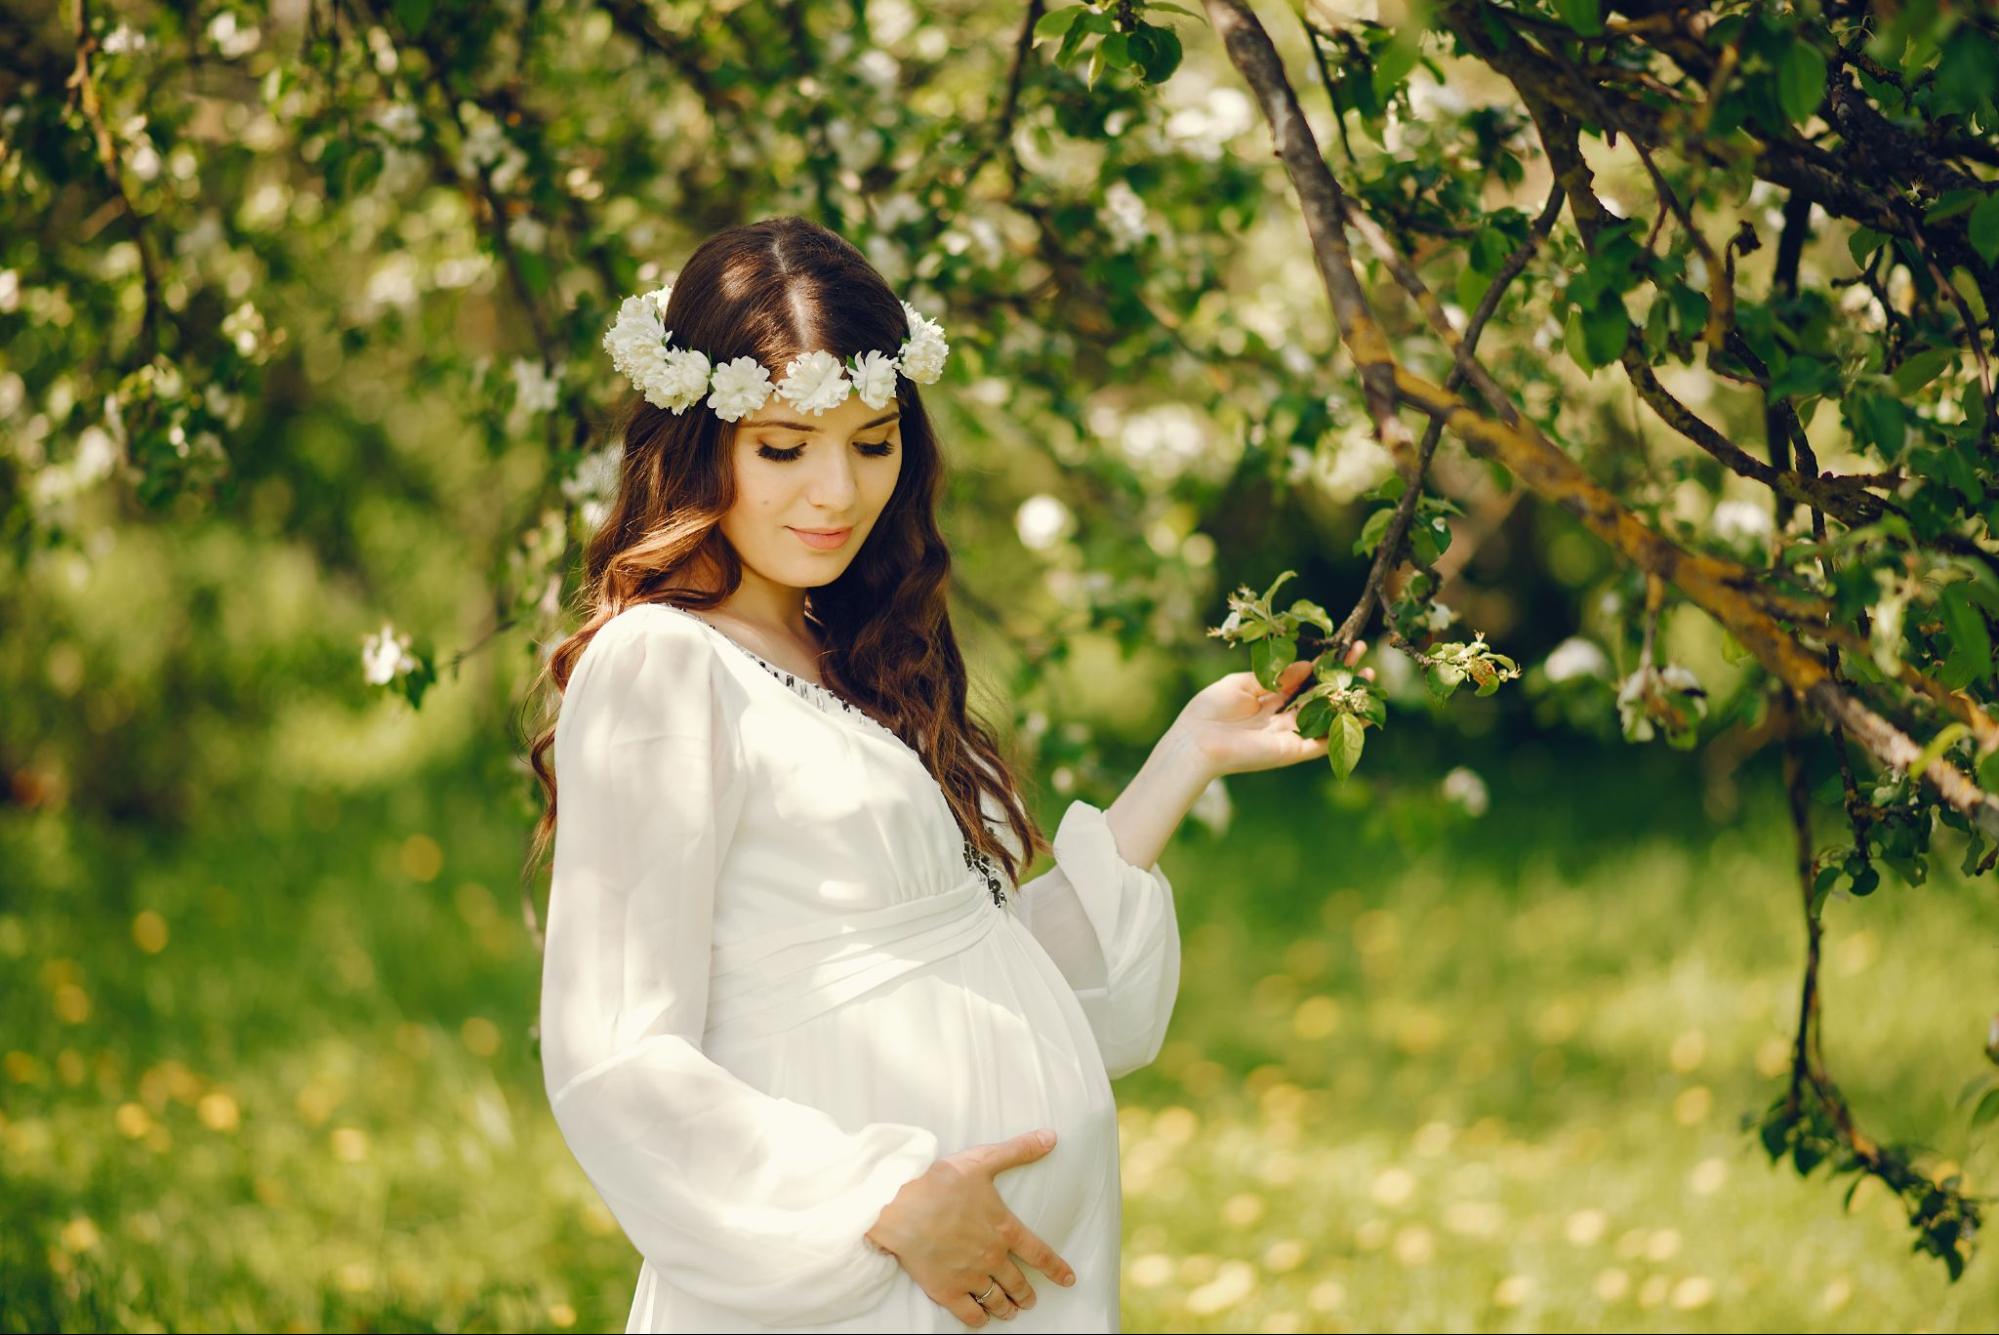 -Blooming beauty: Flower crown pose at baby shower, embracing nature's grace and maternal glow. 